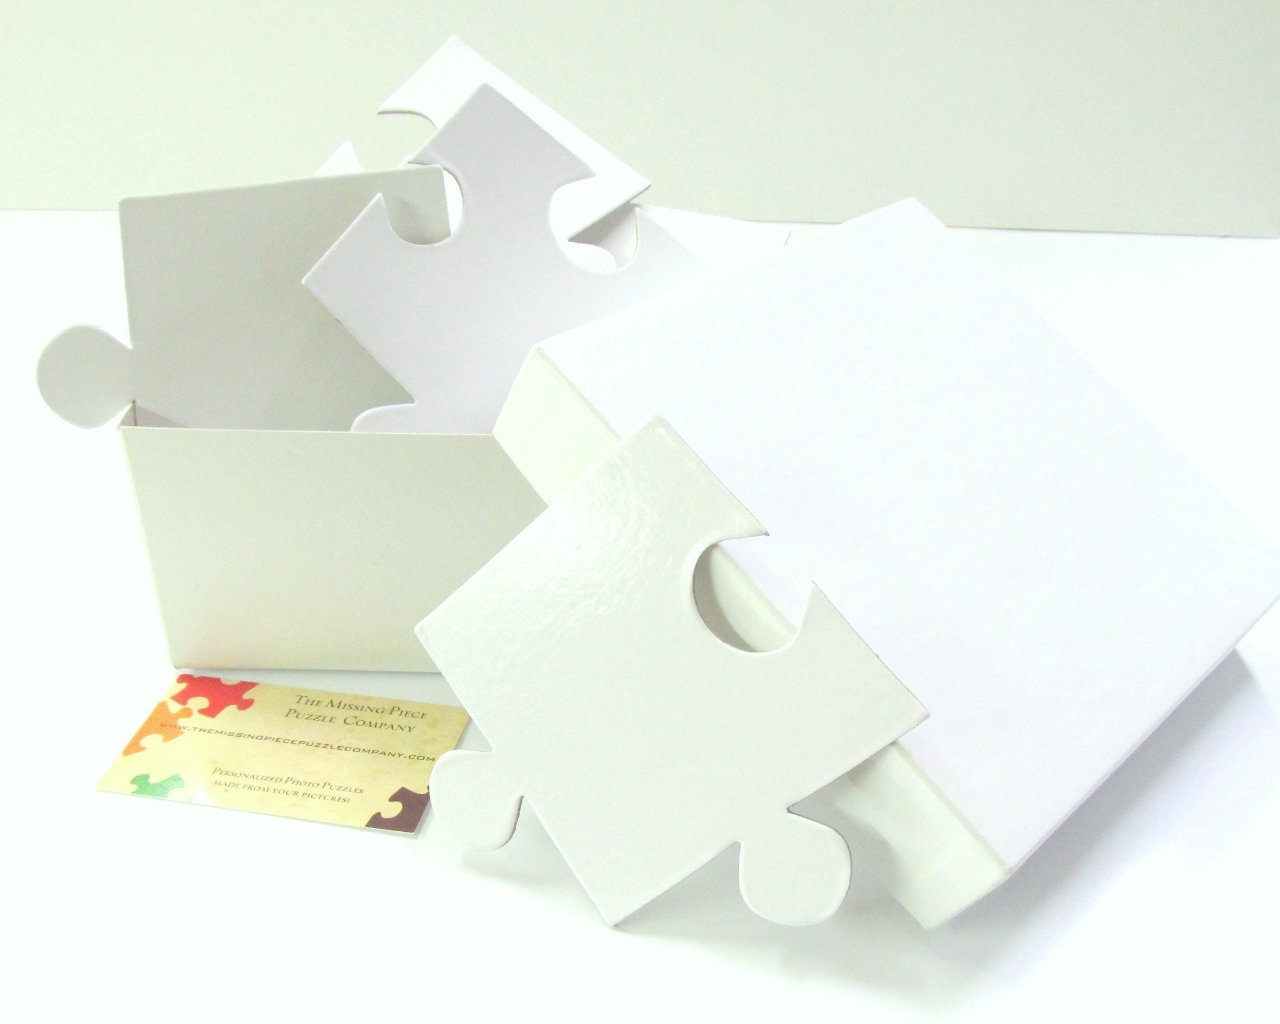 White Wedding Guest Book Puzzle with 30 Extra Large Puzzle Pieces The Missing Piece Puzzle Company